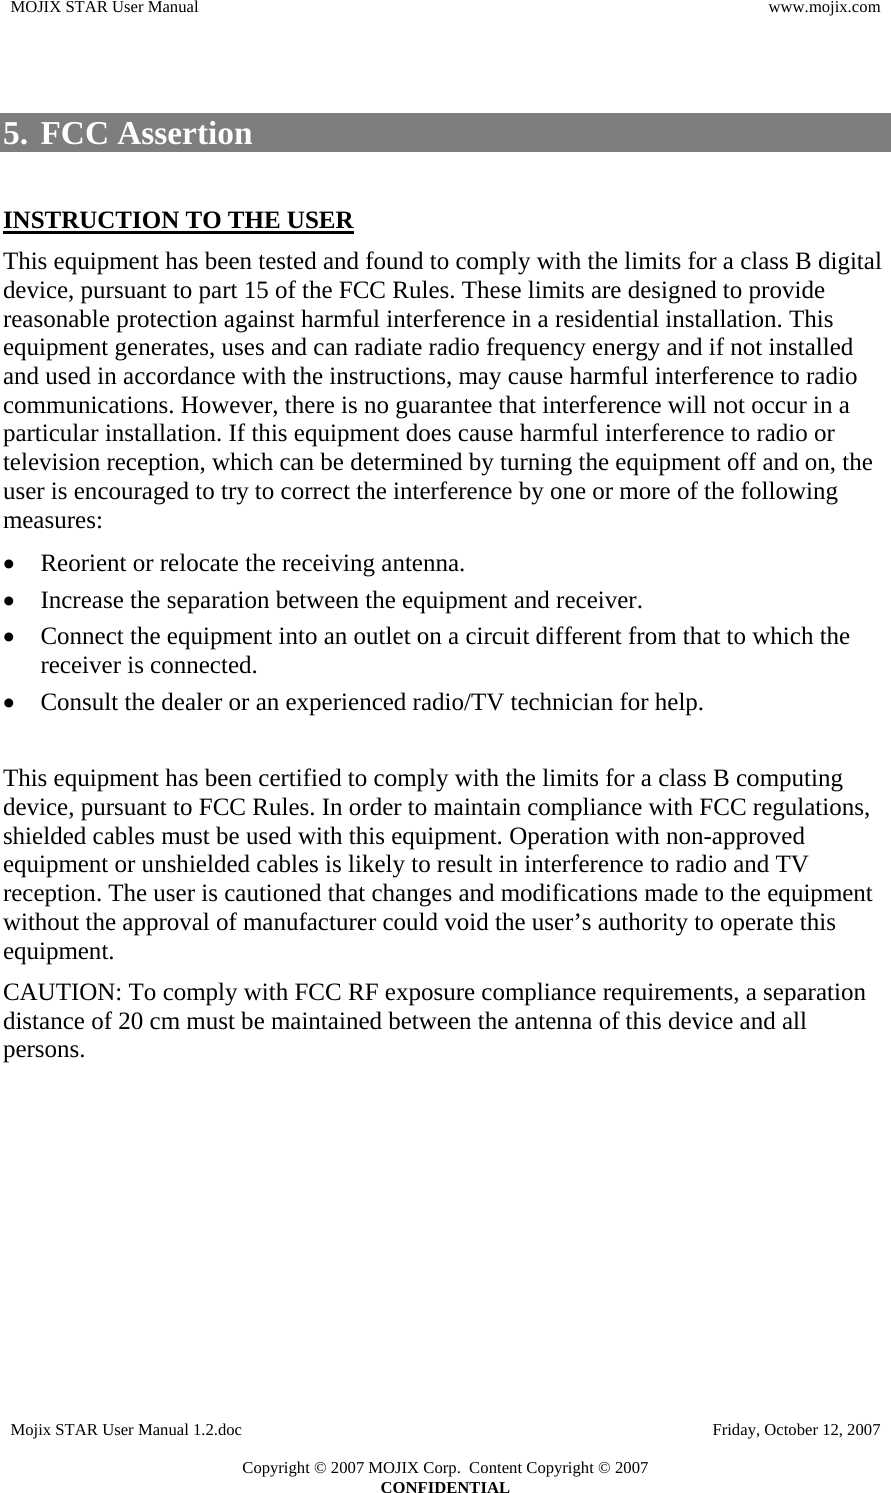 MOJIX STAR User Manual  www.mojix.com   5. FCC Assertion  INSTRUCTION TO THE USER This equipment has been tested and found to comply with the limits for a class B digital device, pursuant to part 15 of the FCC Rules. These limits are designed to provide reasonable protection against harmful interference in a residential installation. This equipment generates, uses and can radiate radio frequency energy and if not installed and used in accordance with the instructions, may cause harmful interference to radio communications. However, there is no guarantee that interference will not occur in a particular installation. If this equipment does cause harmful interference to radio or television reception, which can be determined by turning the equipment off and on, the user is encouraged to try to correct the interference by one or more of the following measures: • Reorient or relocate the receiving antenna. • Increase the separation between the equipment and receiver. • Connect the equipment into an outlet on a circuit different from that to which the receiver is connected. • Consult the dealer or an experienced radio/TV technician for help.  This equipment has been certified to comply with the limits for a class B computing device, pursuant to FCC Rules. In order to maintain compliance with FCC regulations, shielded cables must be used with this equipment. Operation with non-approved equipment or unshielded cables is likely to result in interference to radio and TV reception. The user is cautioned that changes and modifications made to the equipment without the approval of manufacturer could void the user’s authority to operate this equipment. CAUTION: To comply with FCC RF exposure compliance requirements, a separation distance of 20 cm must be maintained between the antenna of this device and all persons. Mojix STAR User Manual 1.2.doc    Friday, October 12, 2007  Copyright © 2007 MOJIX Corp.  Content Copyright © 2007 CONFIDENTIAL 